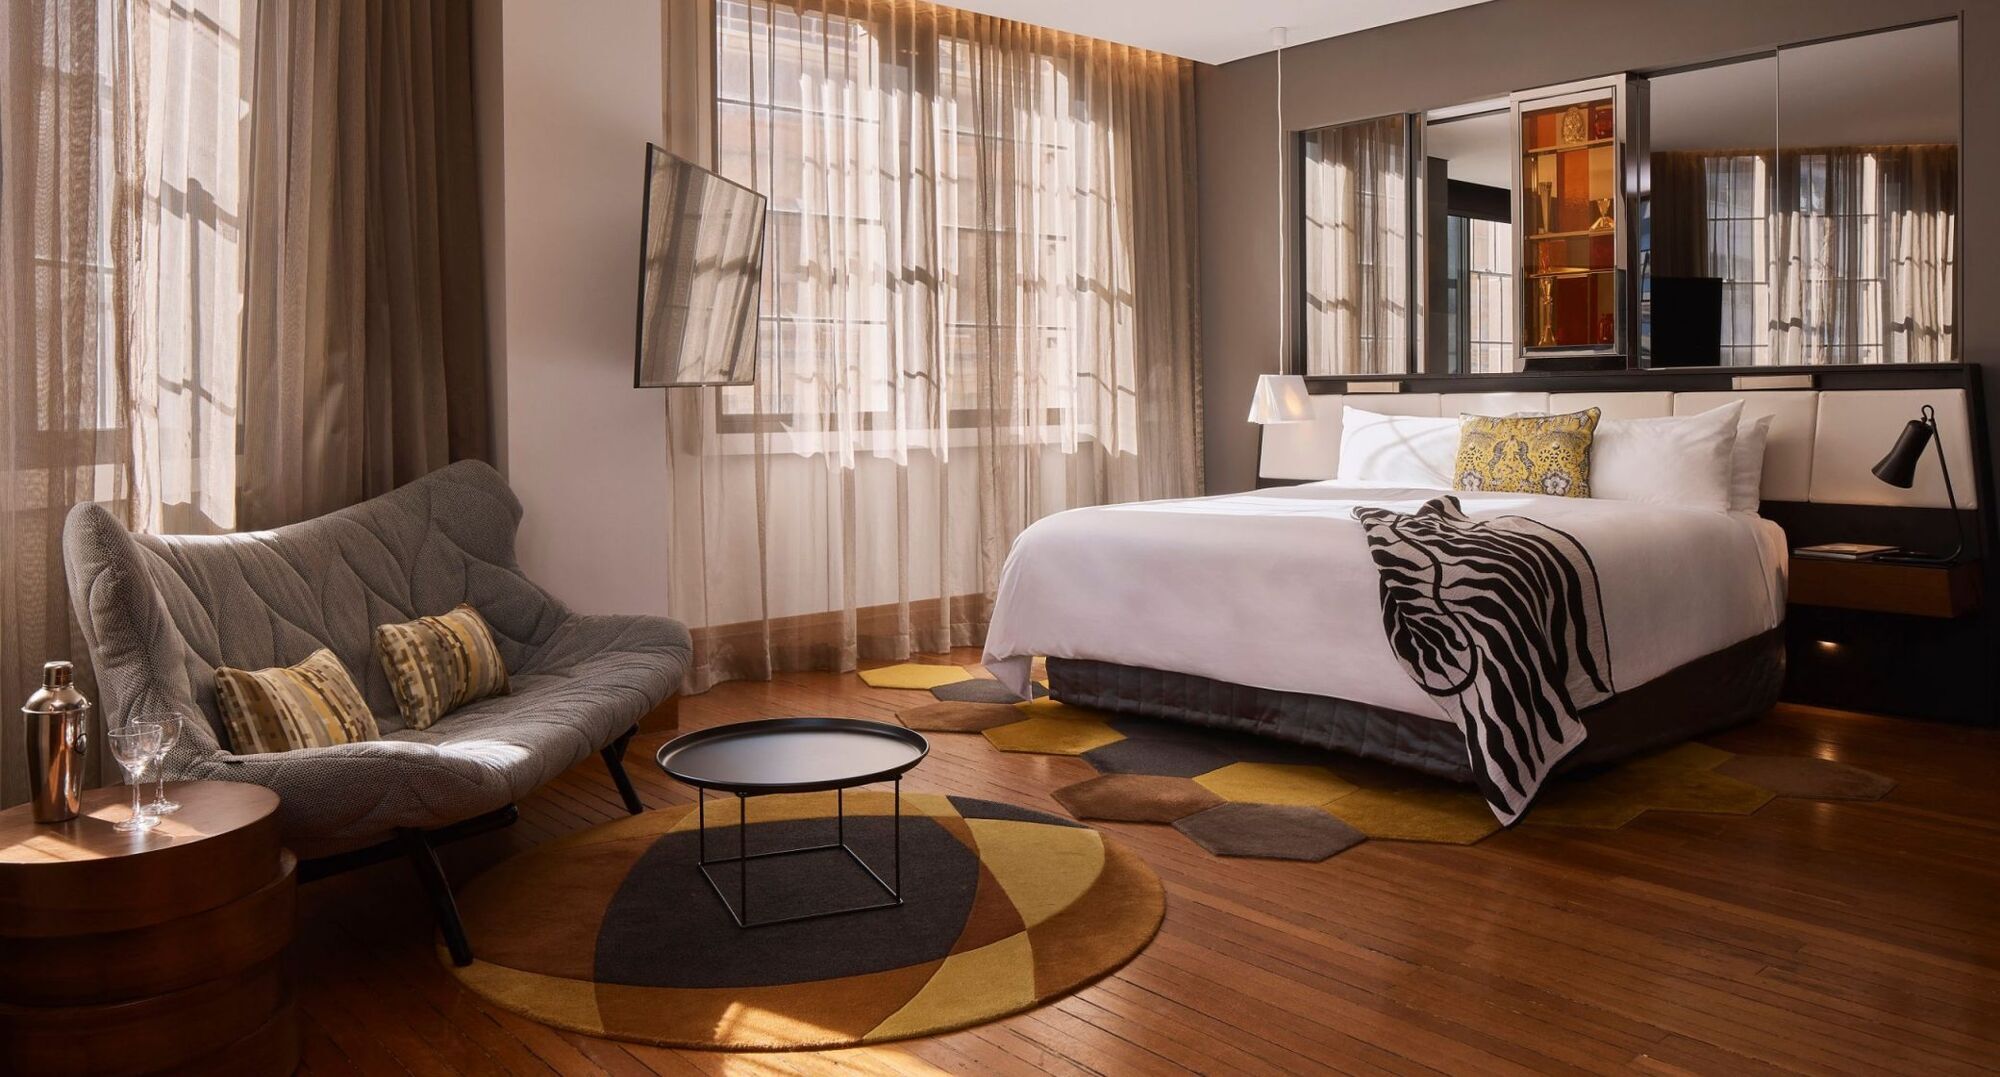 Best boutique hotels in Sydney for a stopover amidst innovative architecture, great mobility and a cosy retreat experience